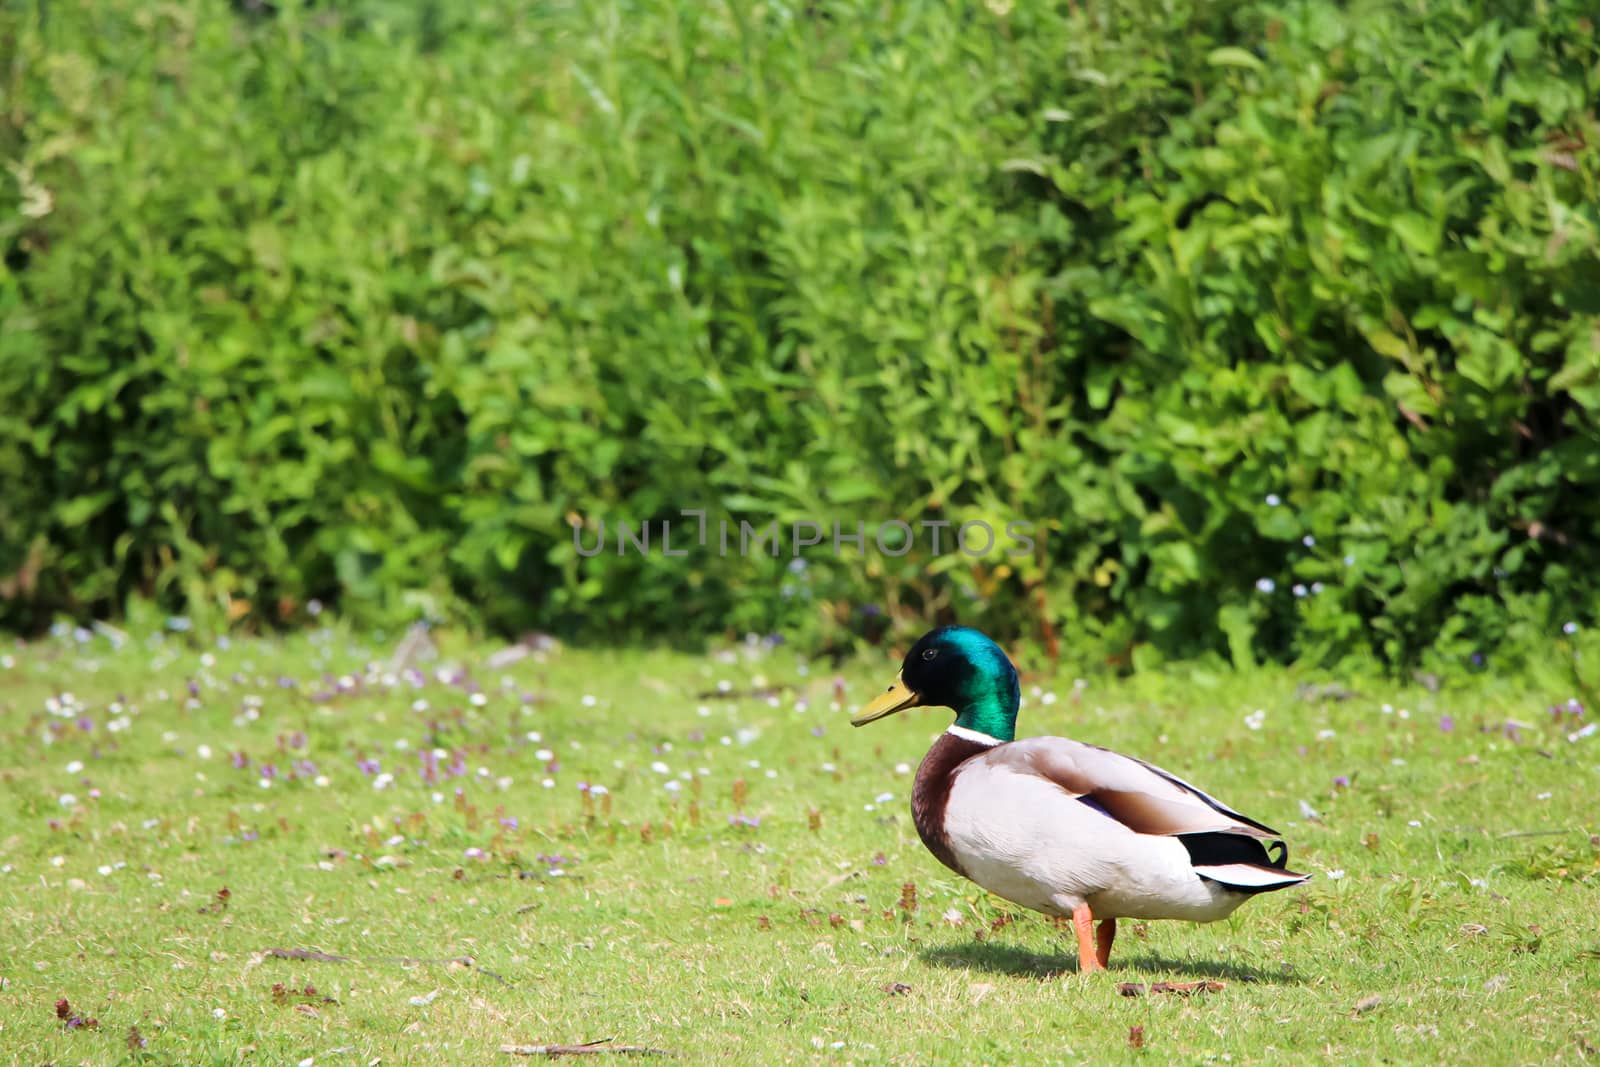 A Duck in Park by Mads_Hjorth_Jakobsen